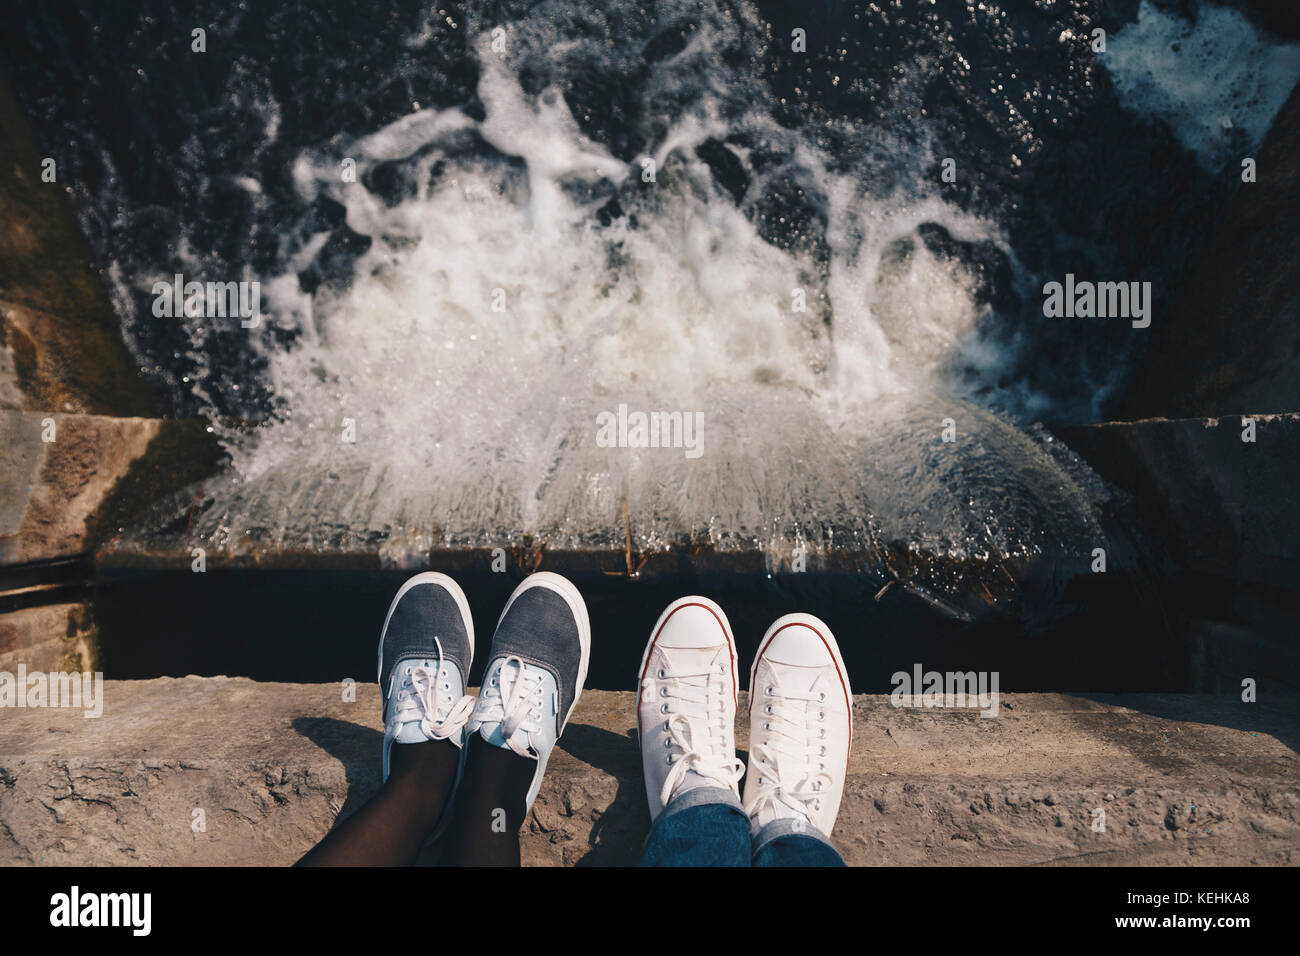 Feet of people standing at the edge of flowing water Stock Photo